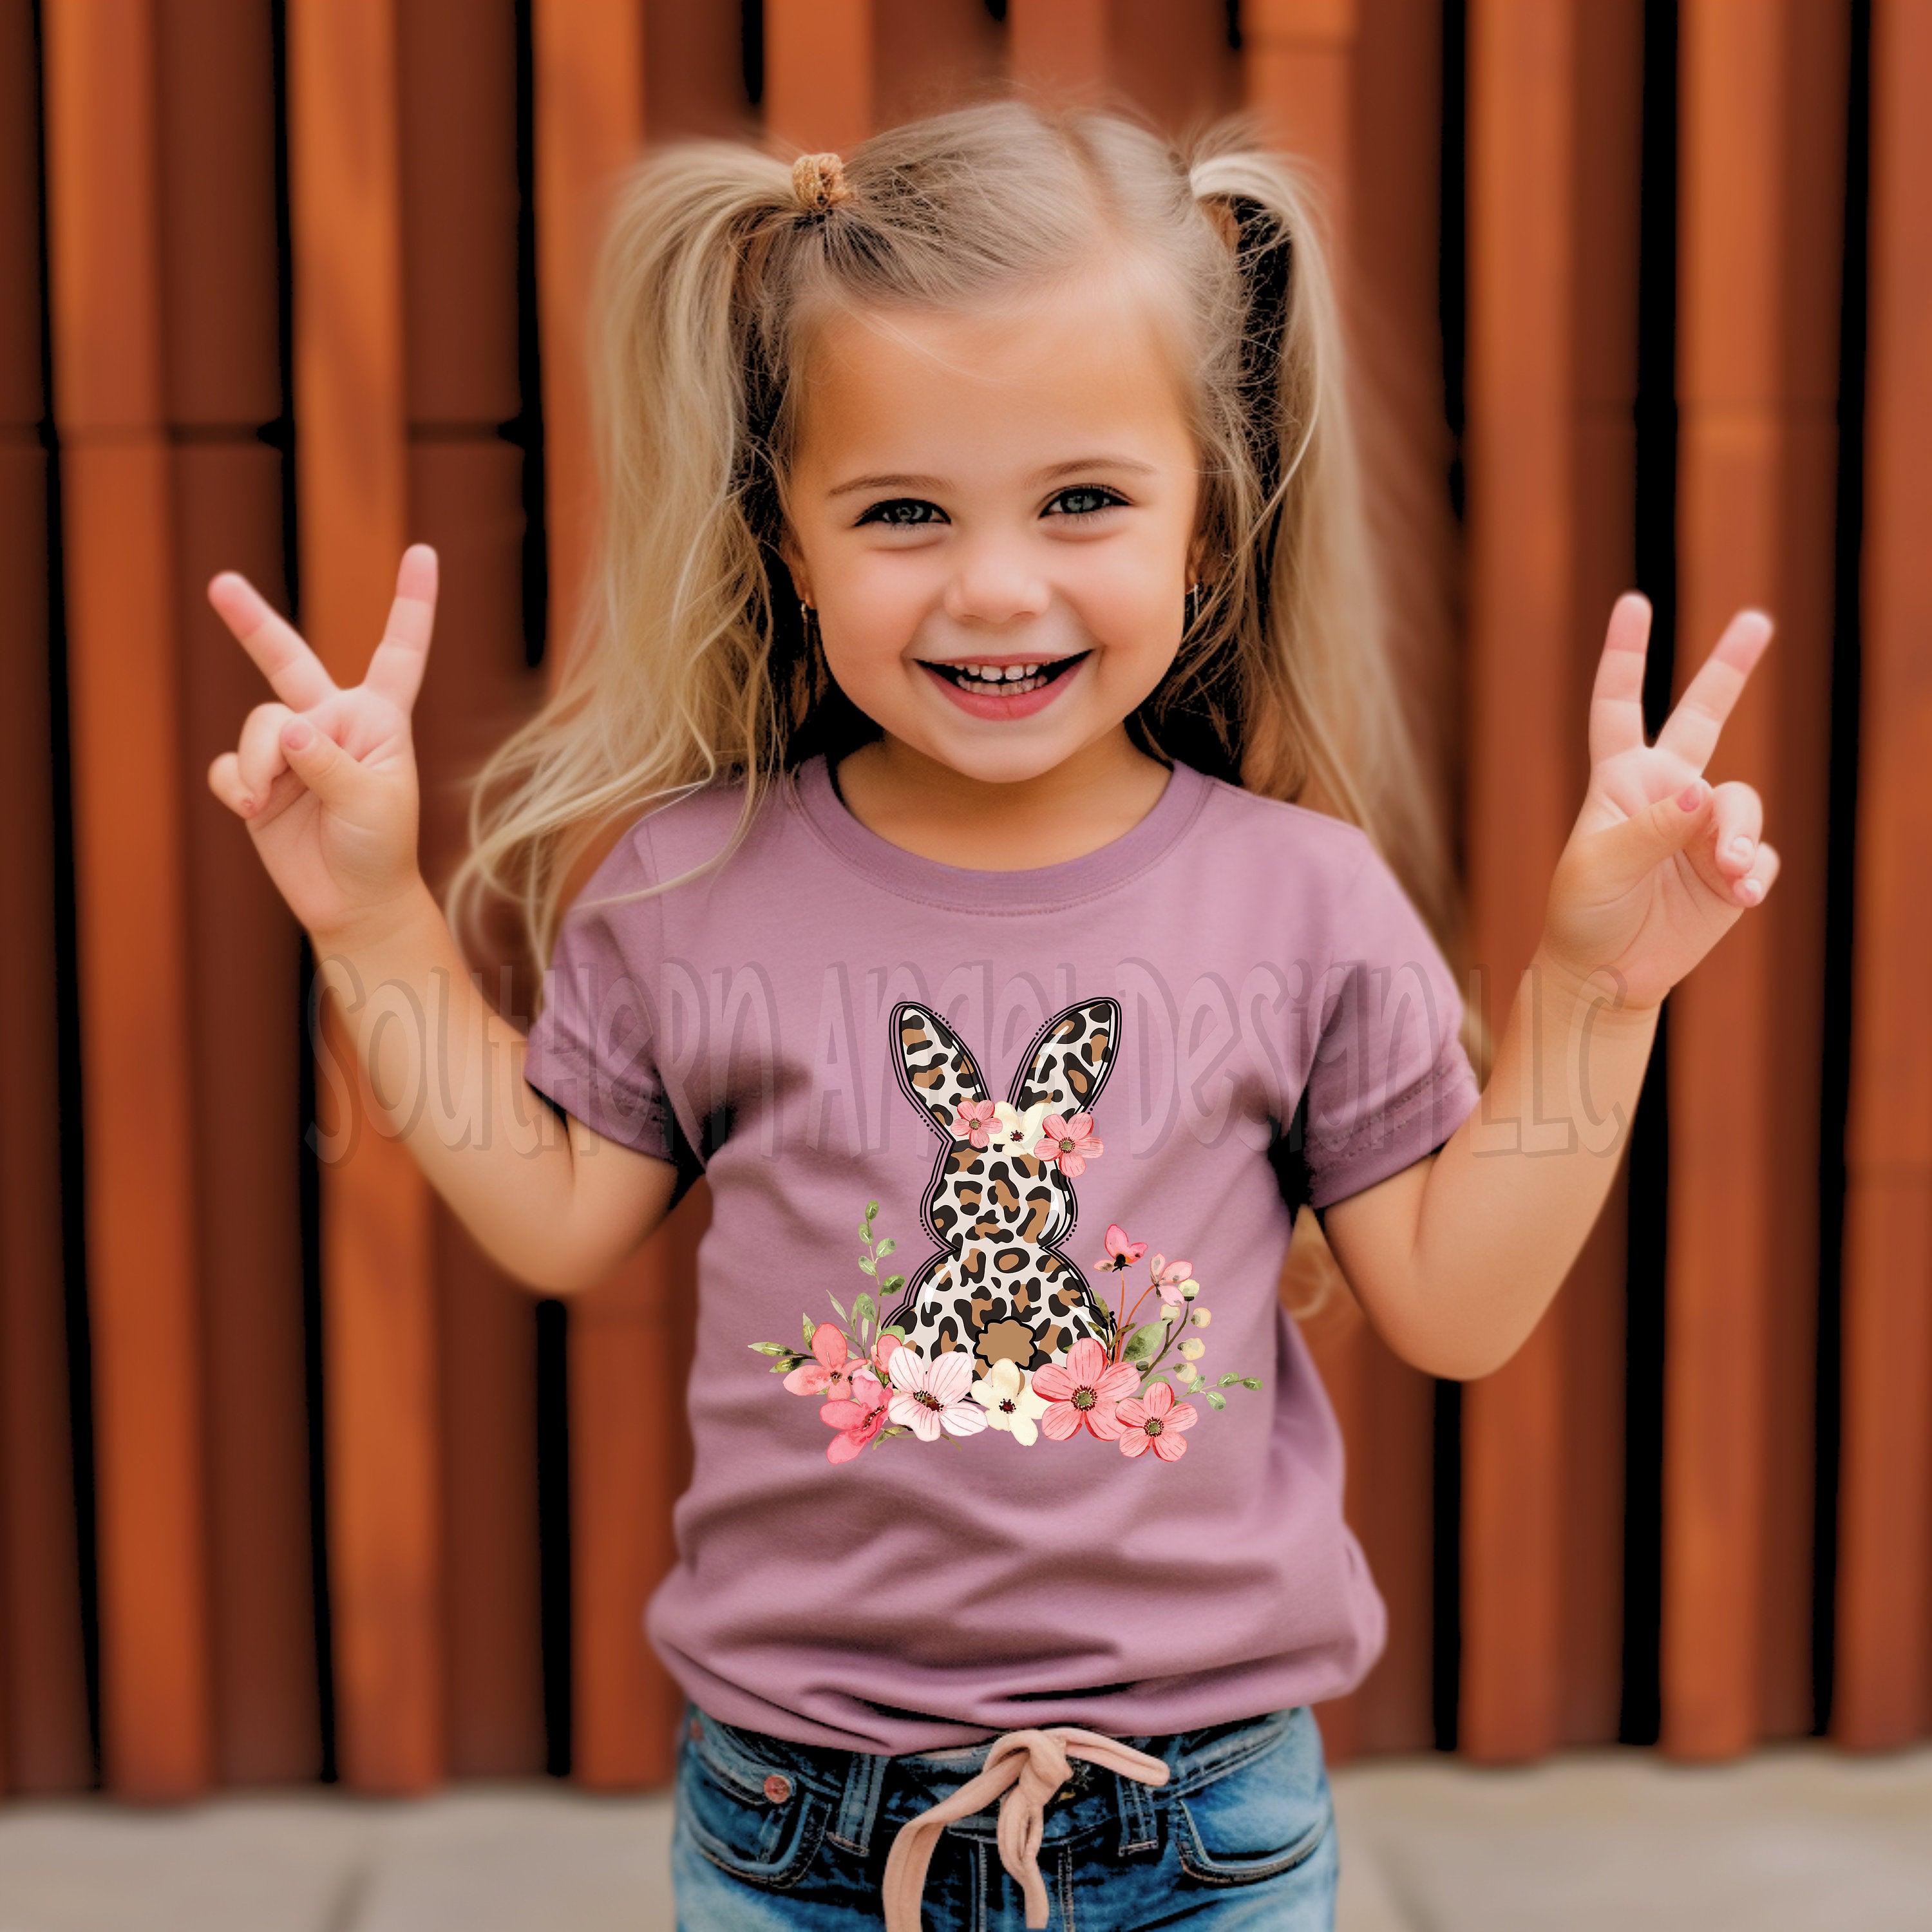 Floral bunny shirt, Too Hip Too Hop, Toddler Easter shirt, Kids Easter shirt, Easter Bunny shirt, Girls Easter shirt, Baby Easter